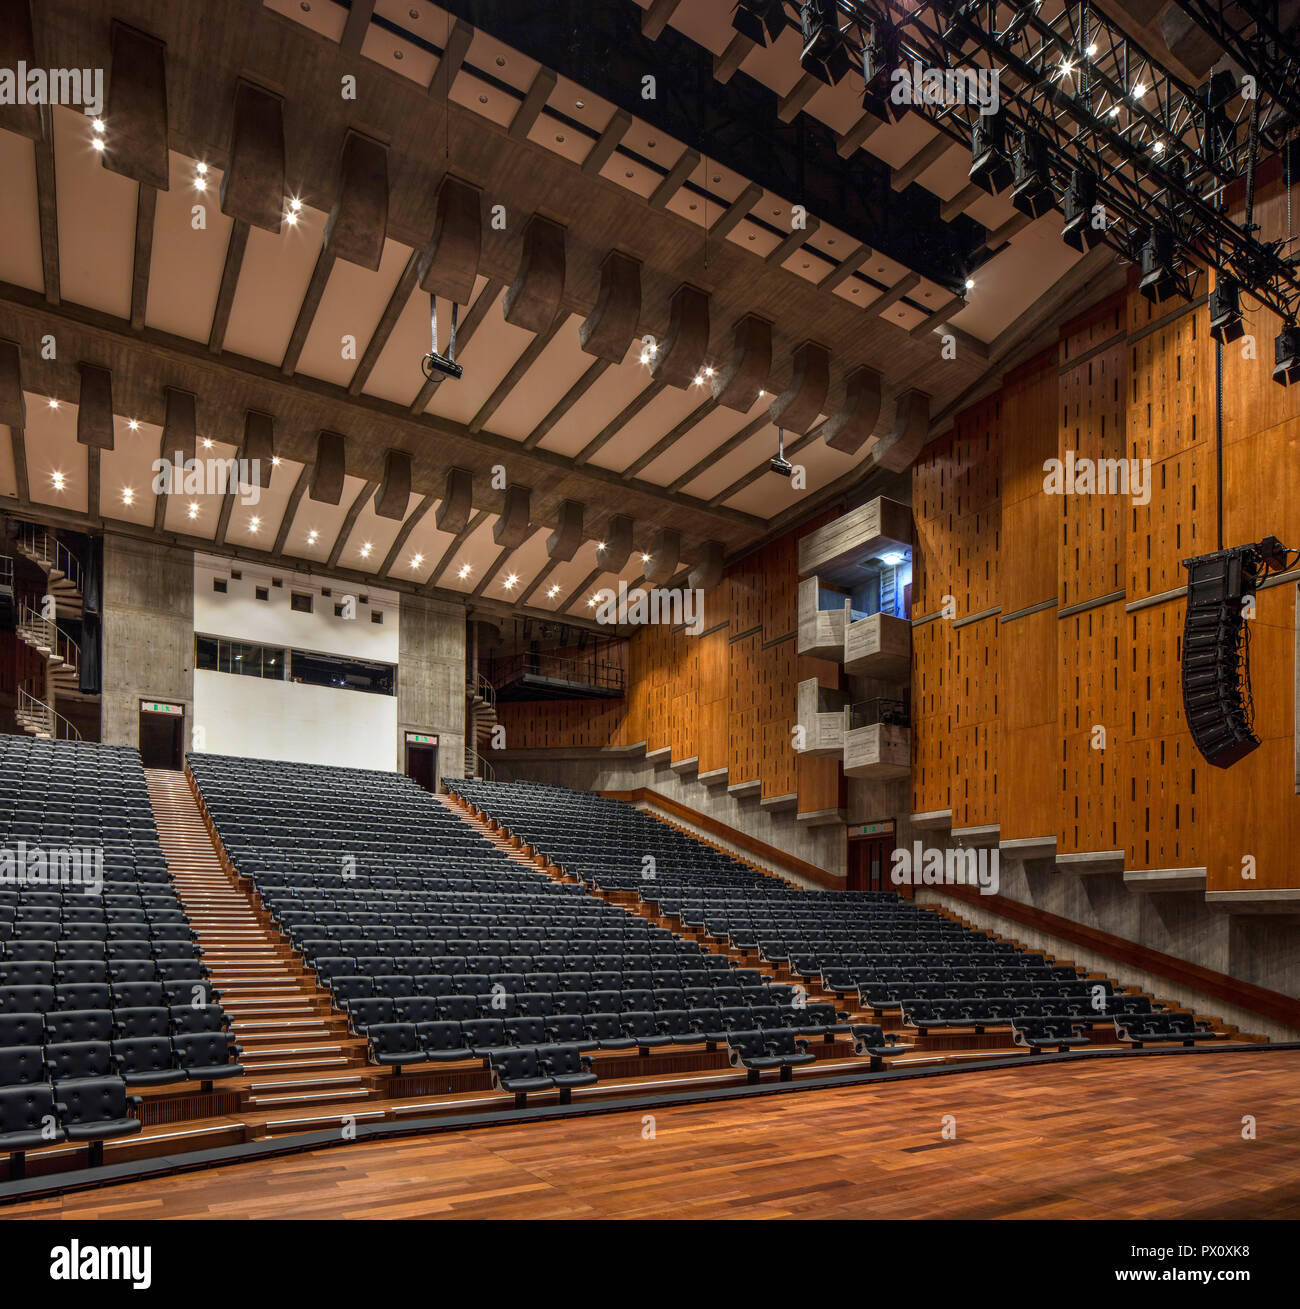 The restored Purcell Room at the Queen Elizabeth Hall, Southbank Centre, London, UK. Stock Photo